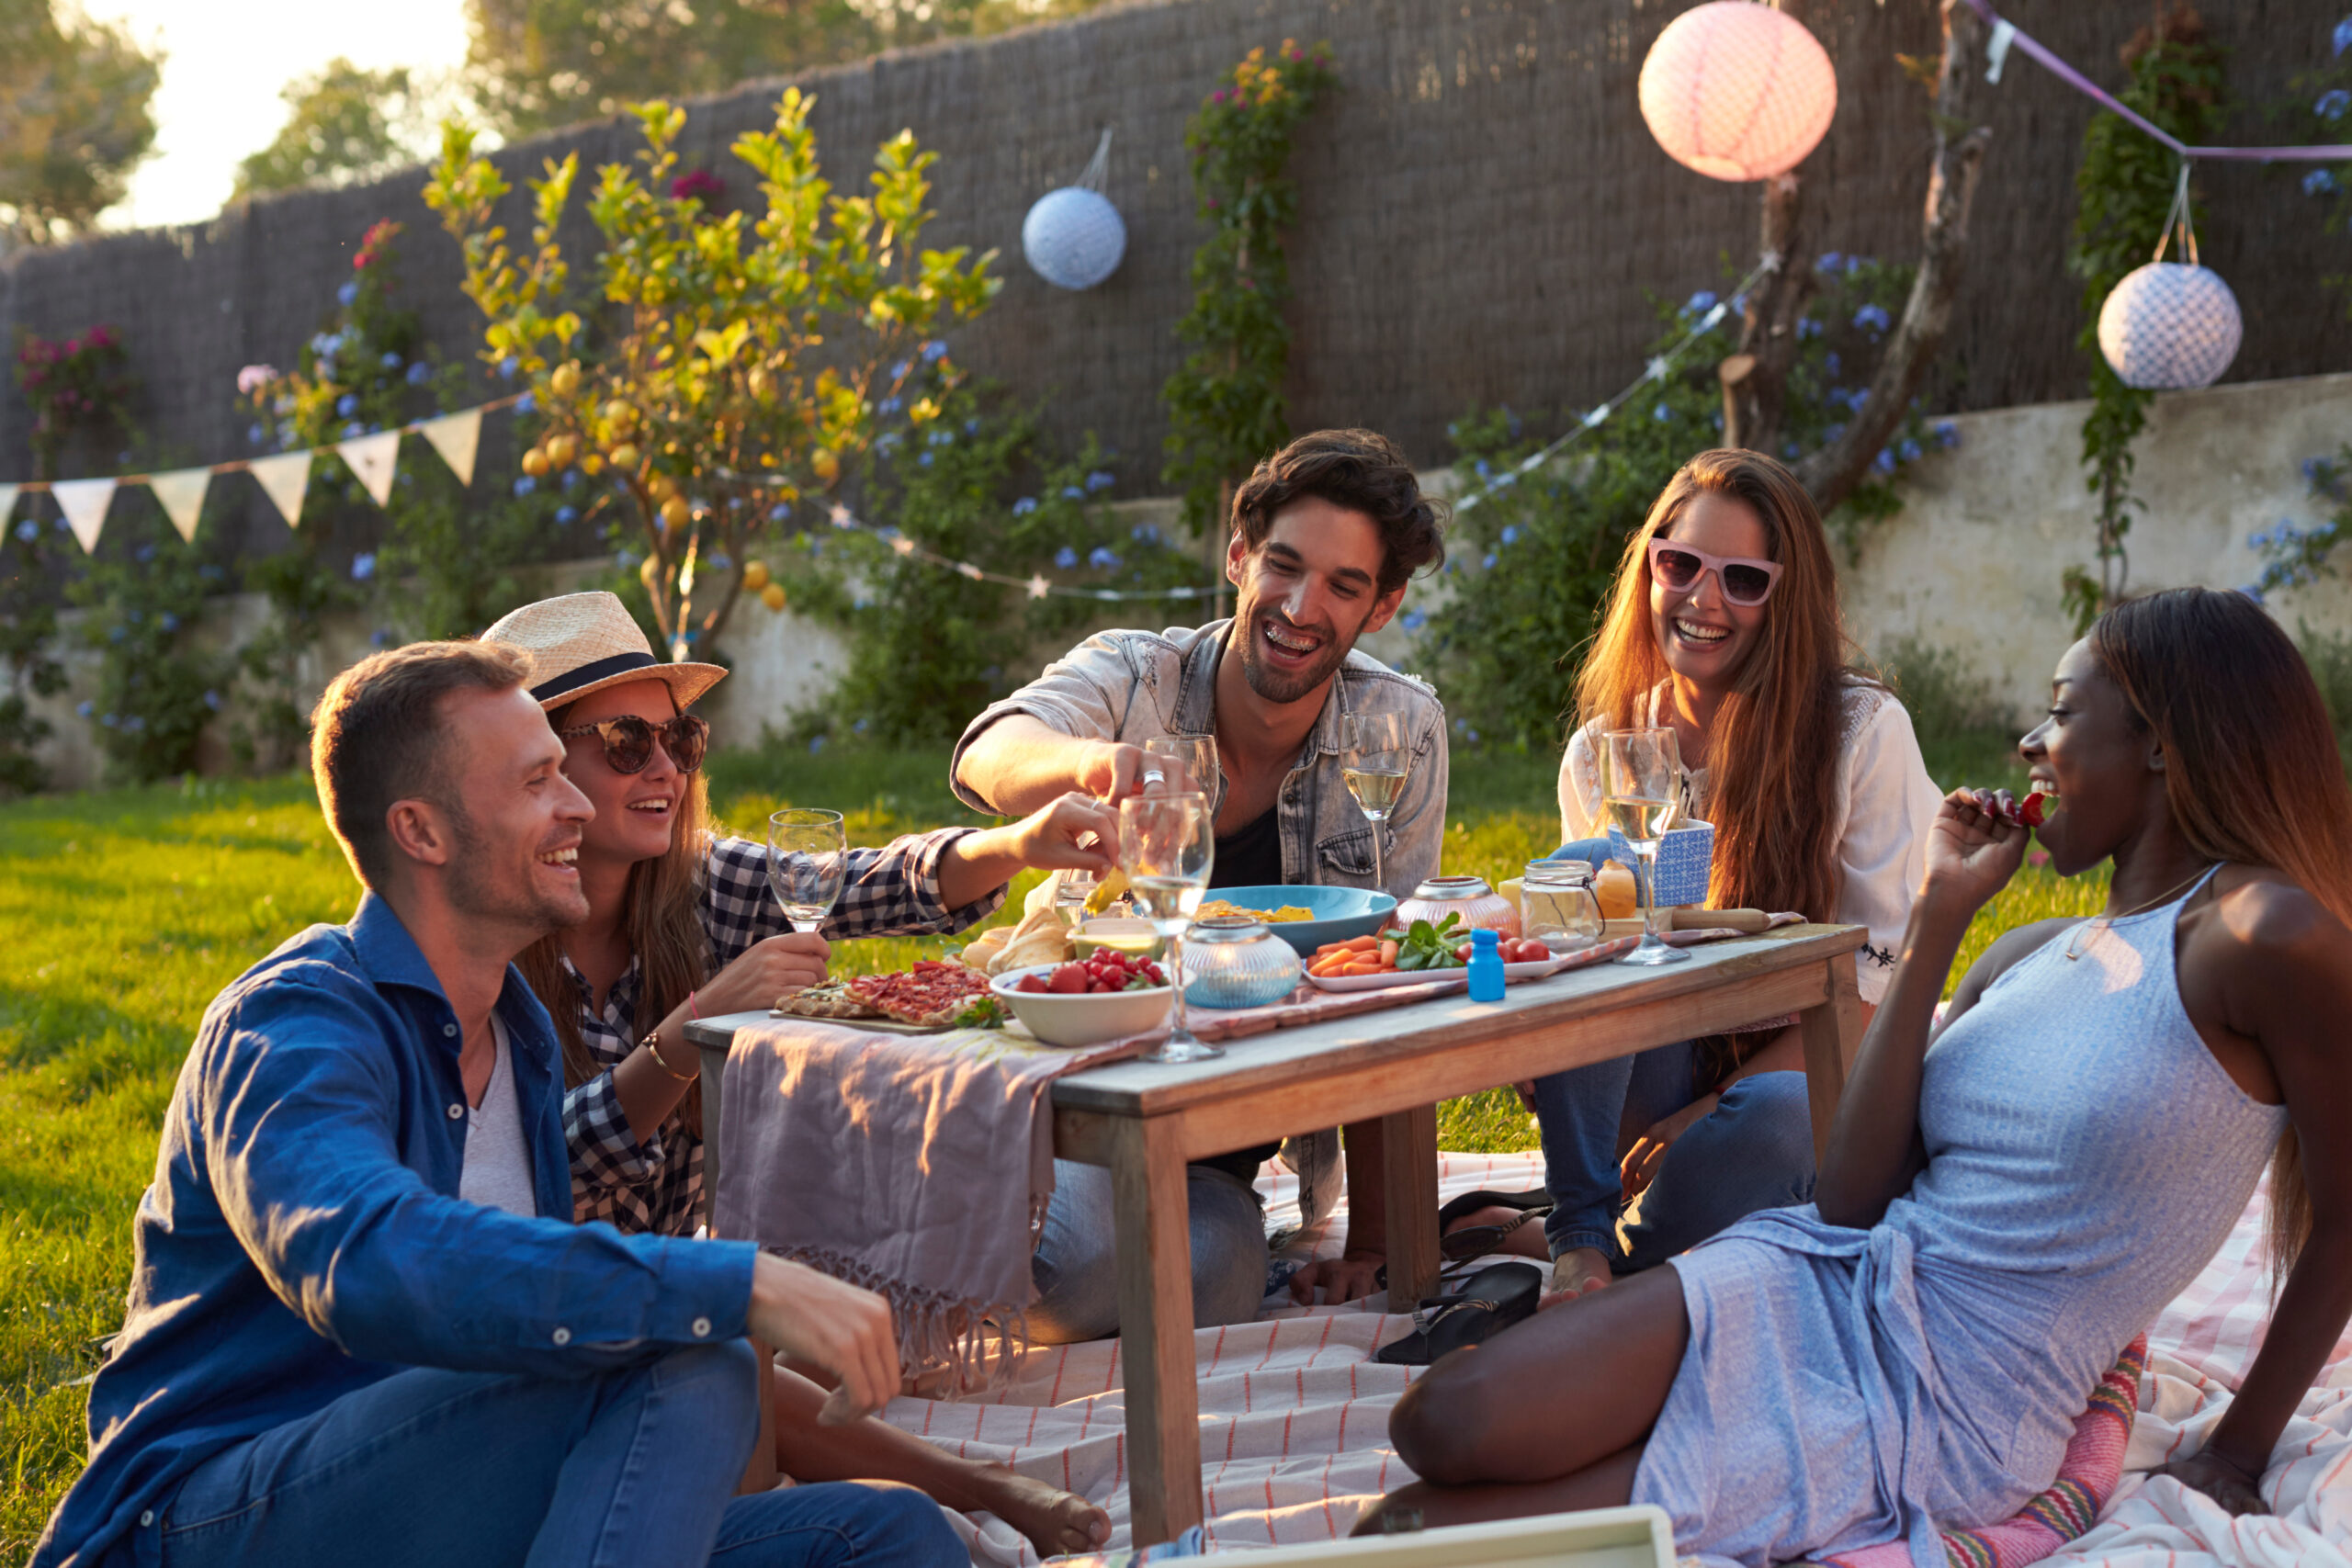 How to create a festival vibe in your garden